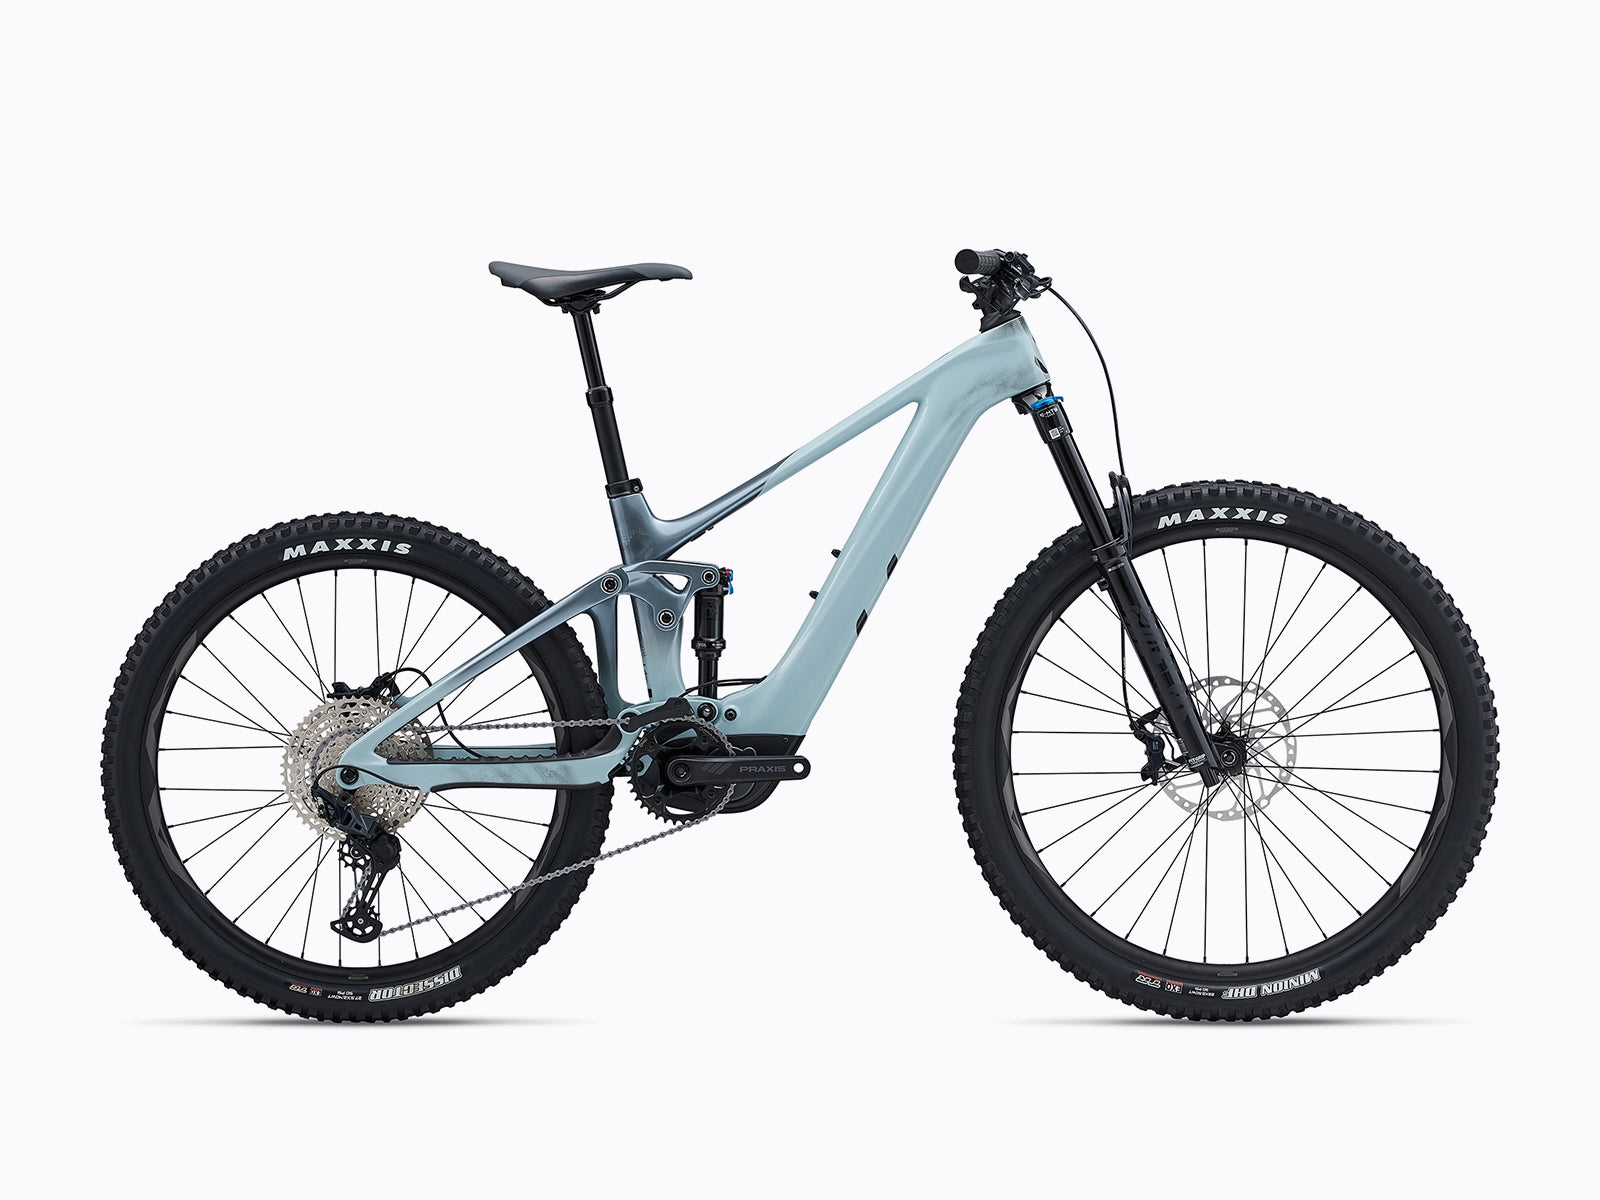 image includes product image for intrigue x advanced e+ elite 2, now available to order on giant bicycles australia